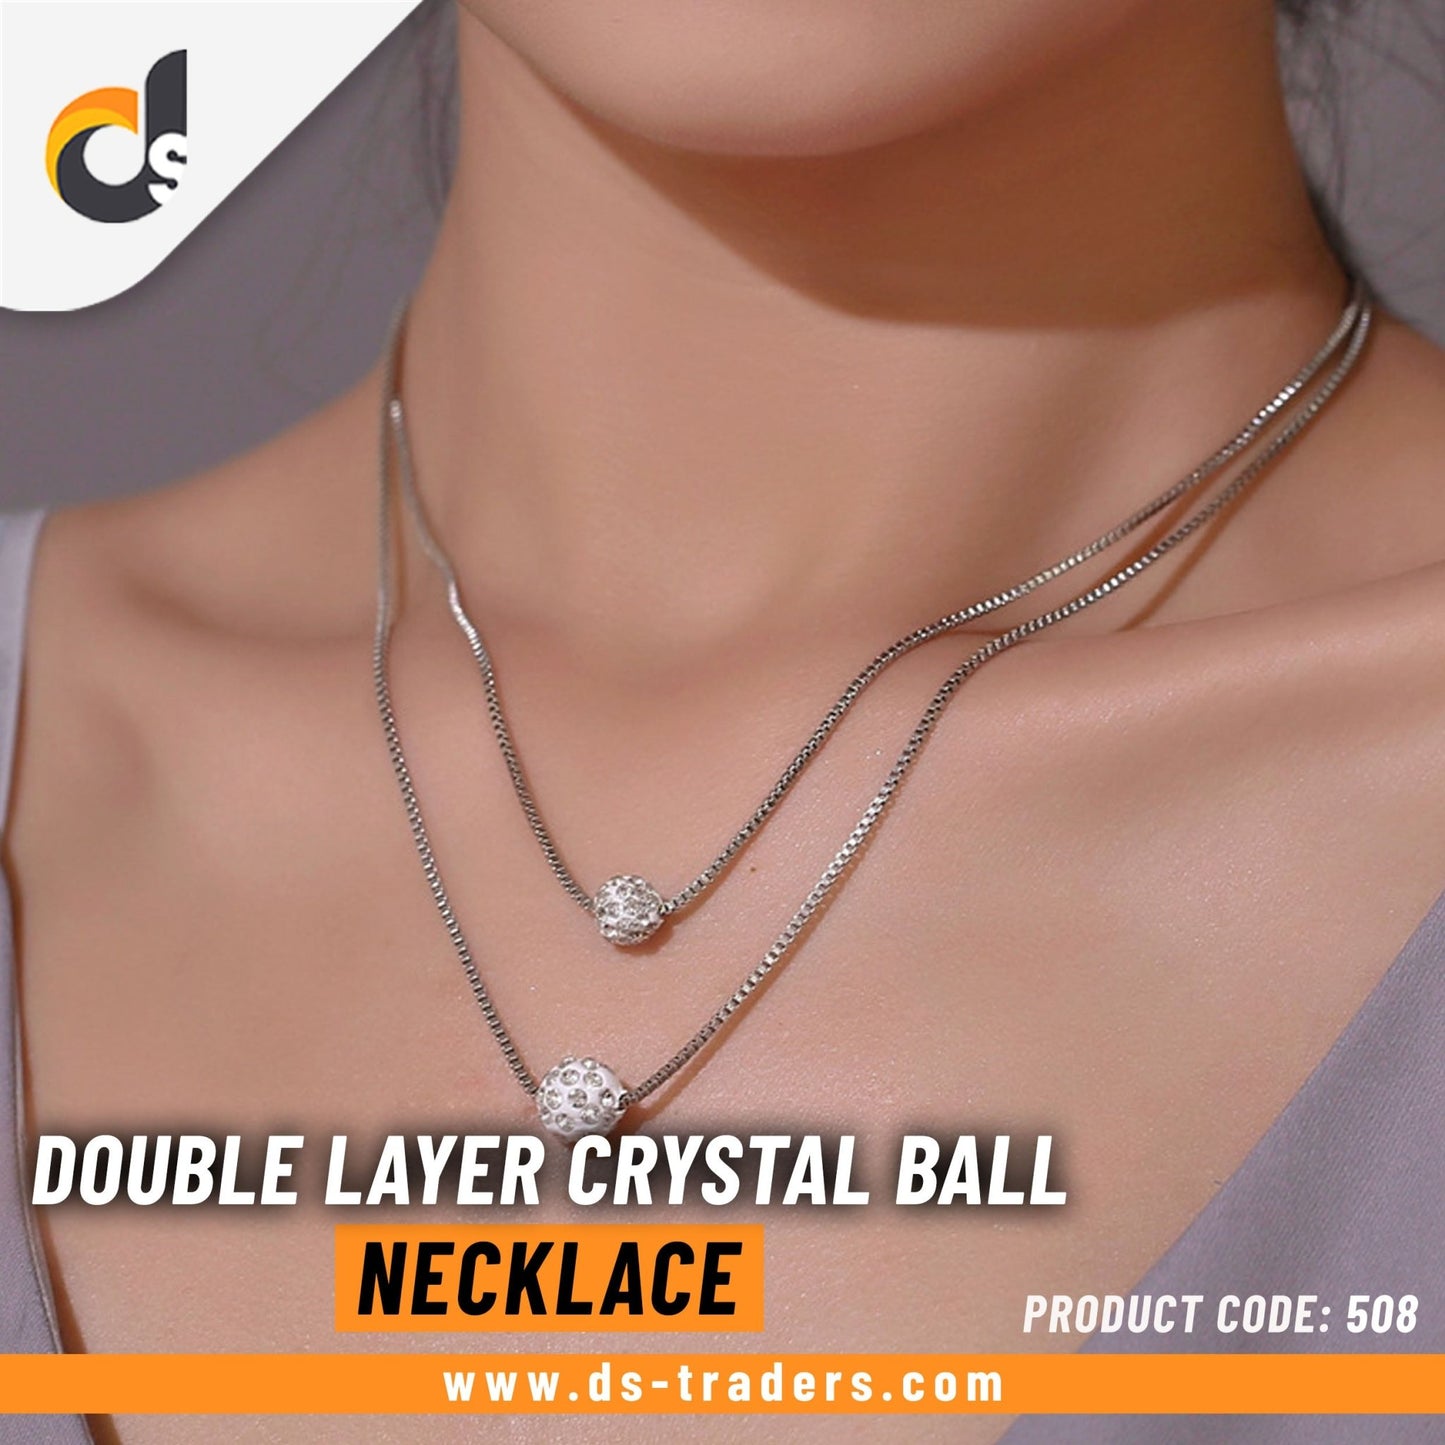 Double Layer Crystal Ball Necklace - DS Traders